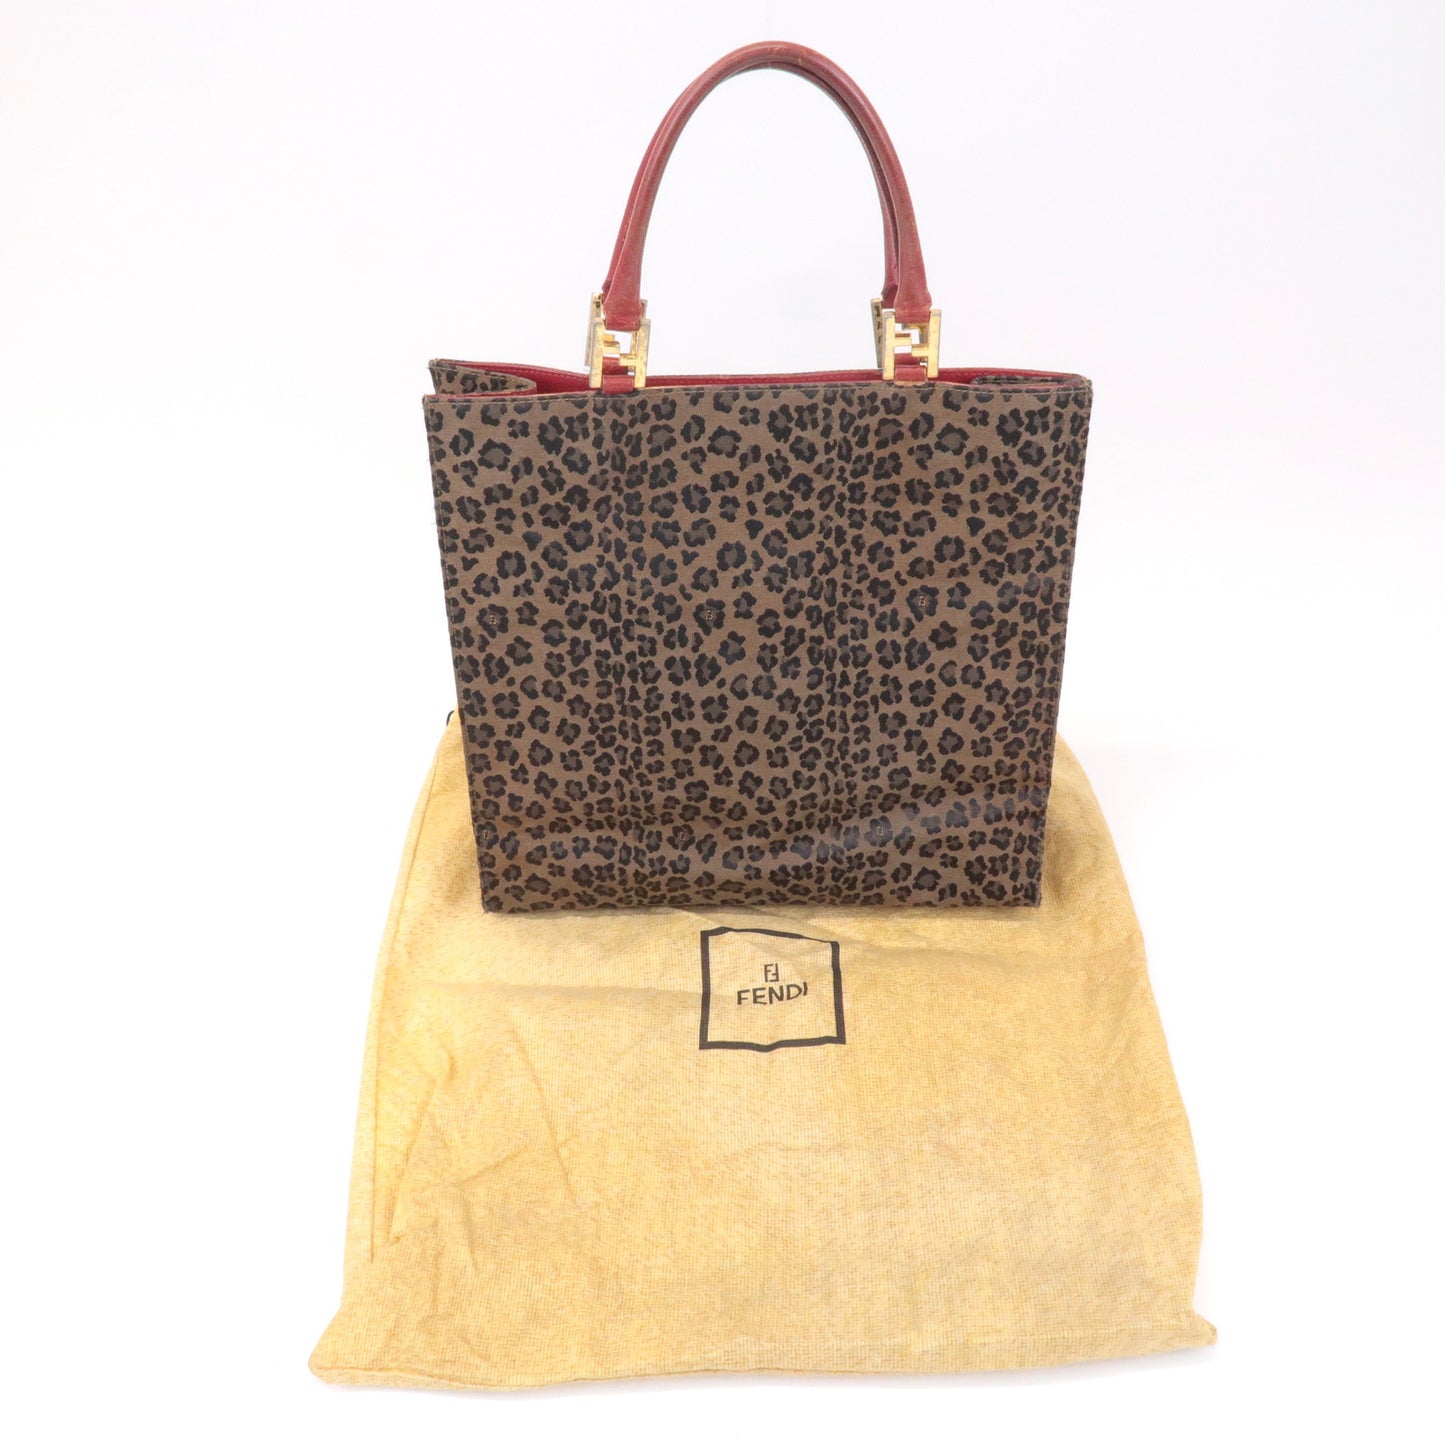 FENDI Canvas Leather Leopard Tote Bag Hand Bag Brown Red